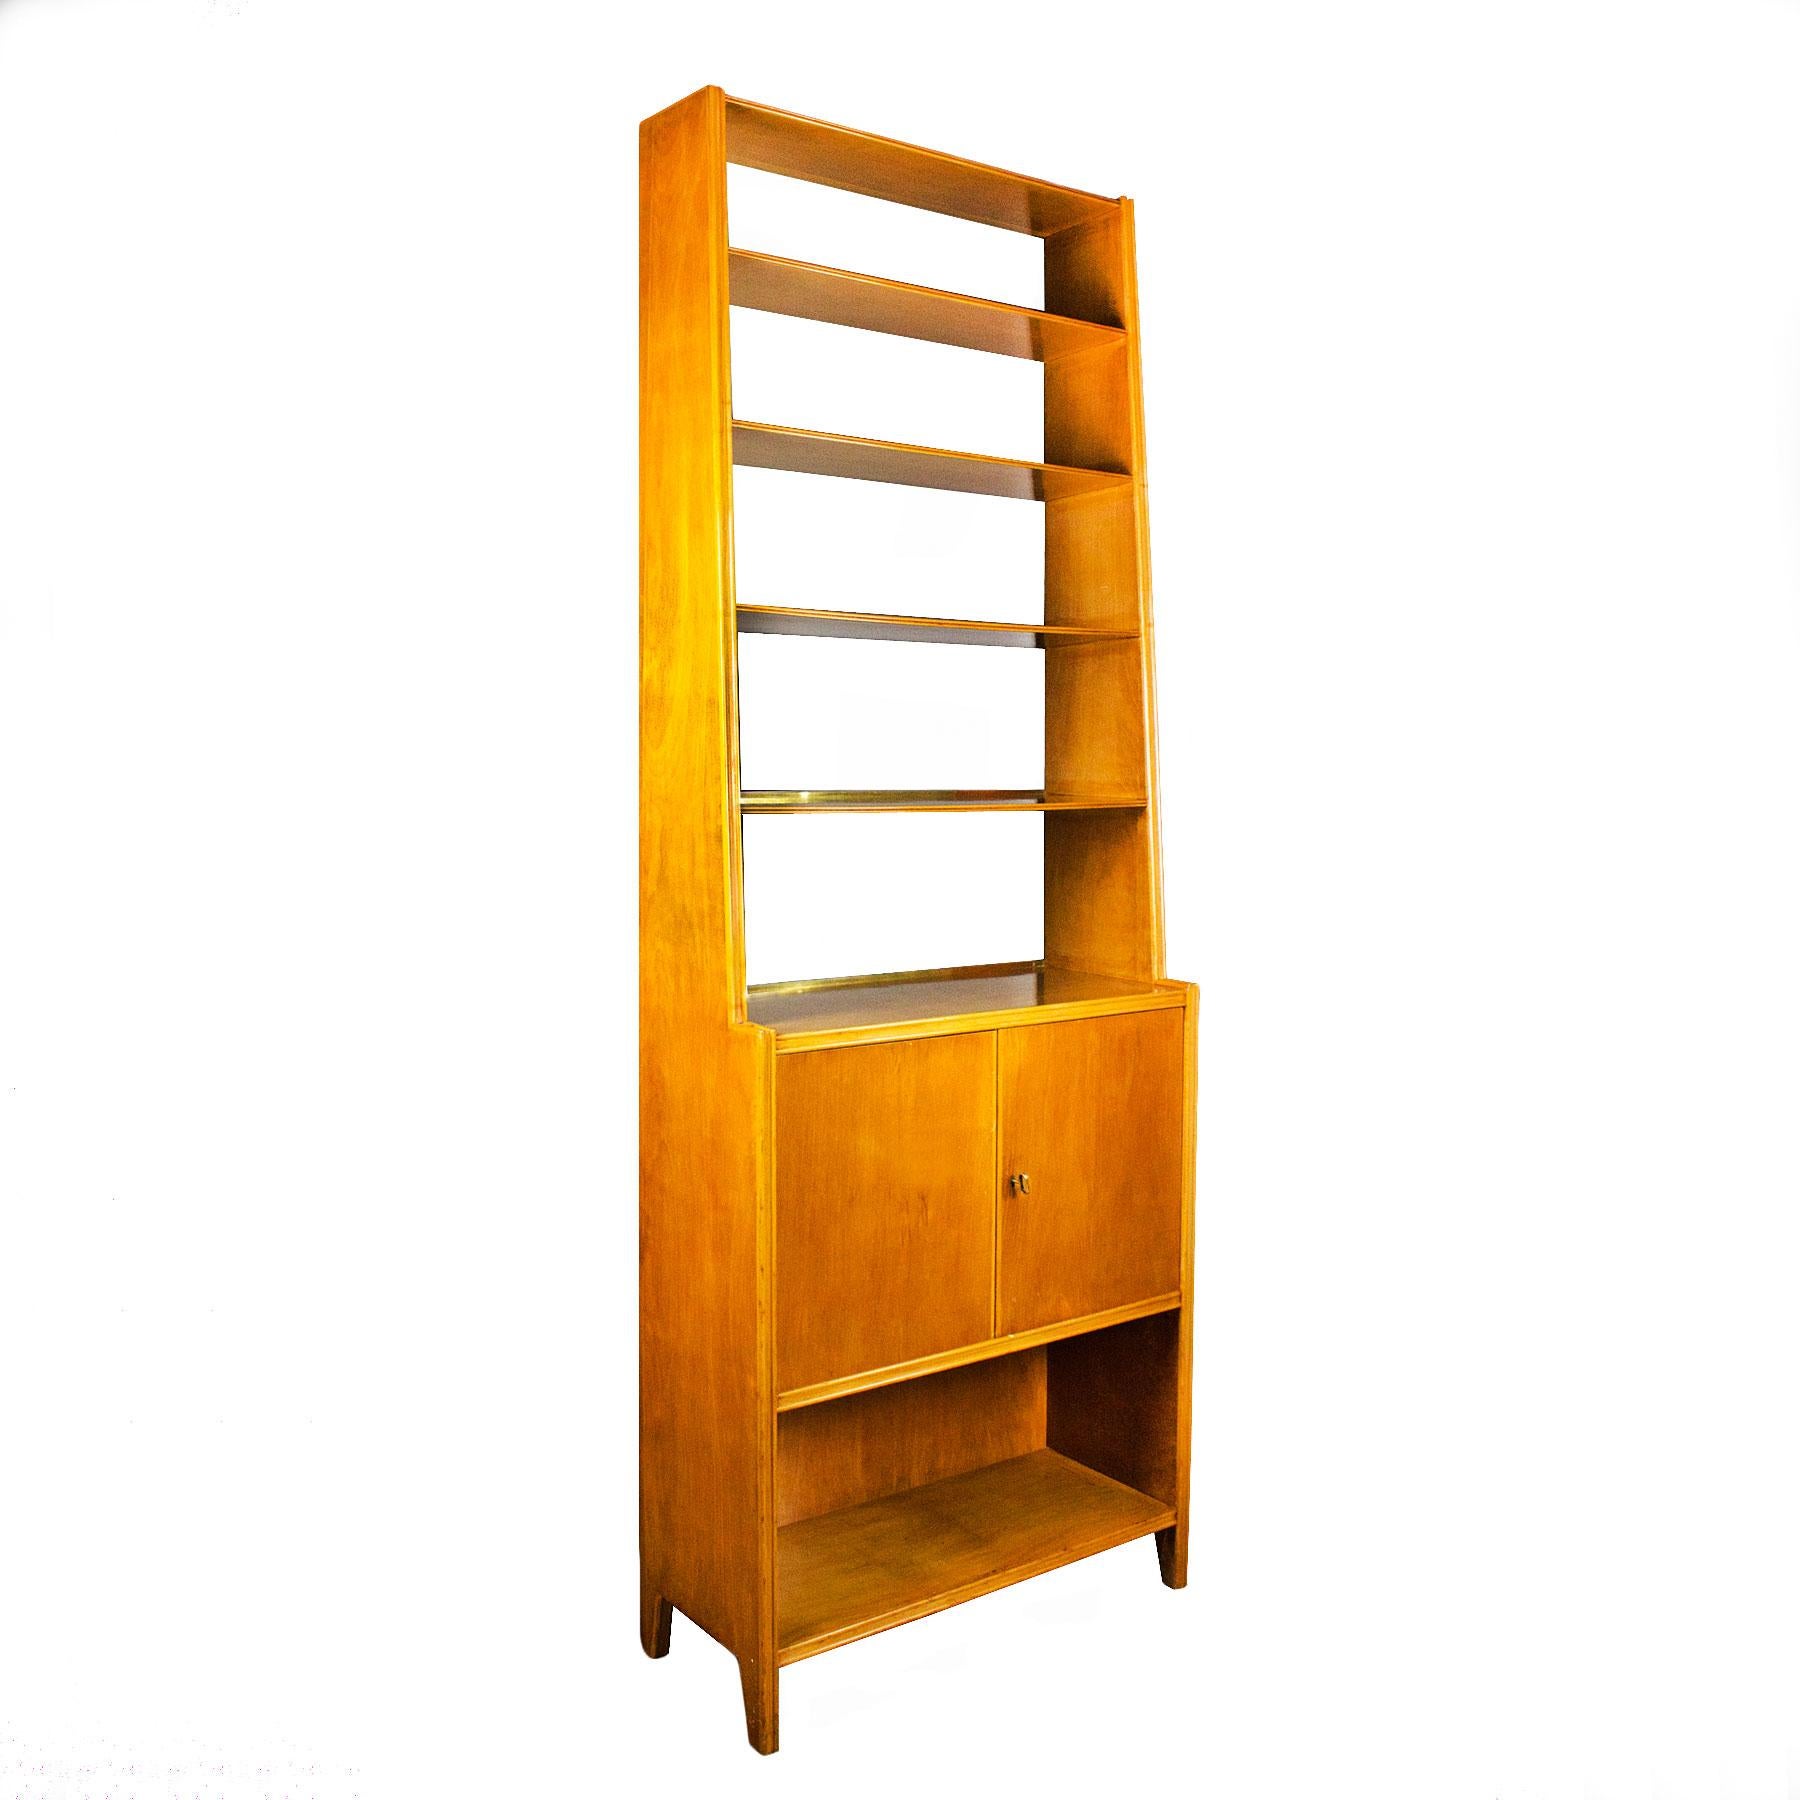 Bookcase, maple wood, French polished, two doors and five shelves, one shelf inside.

Italy, circa 1950.